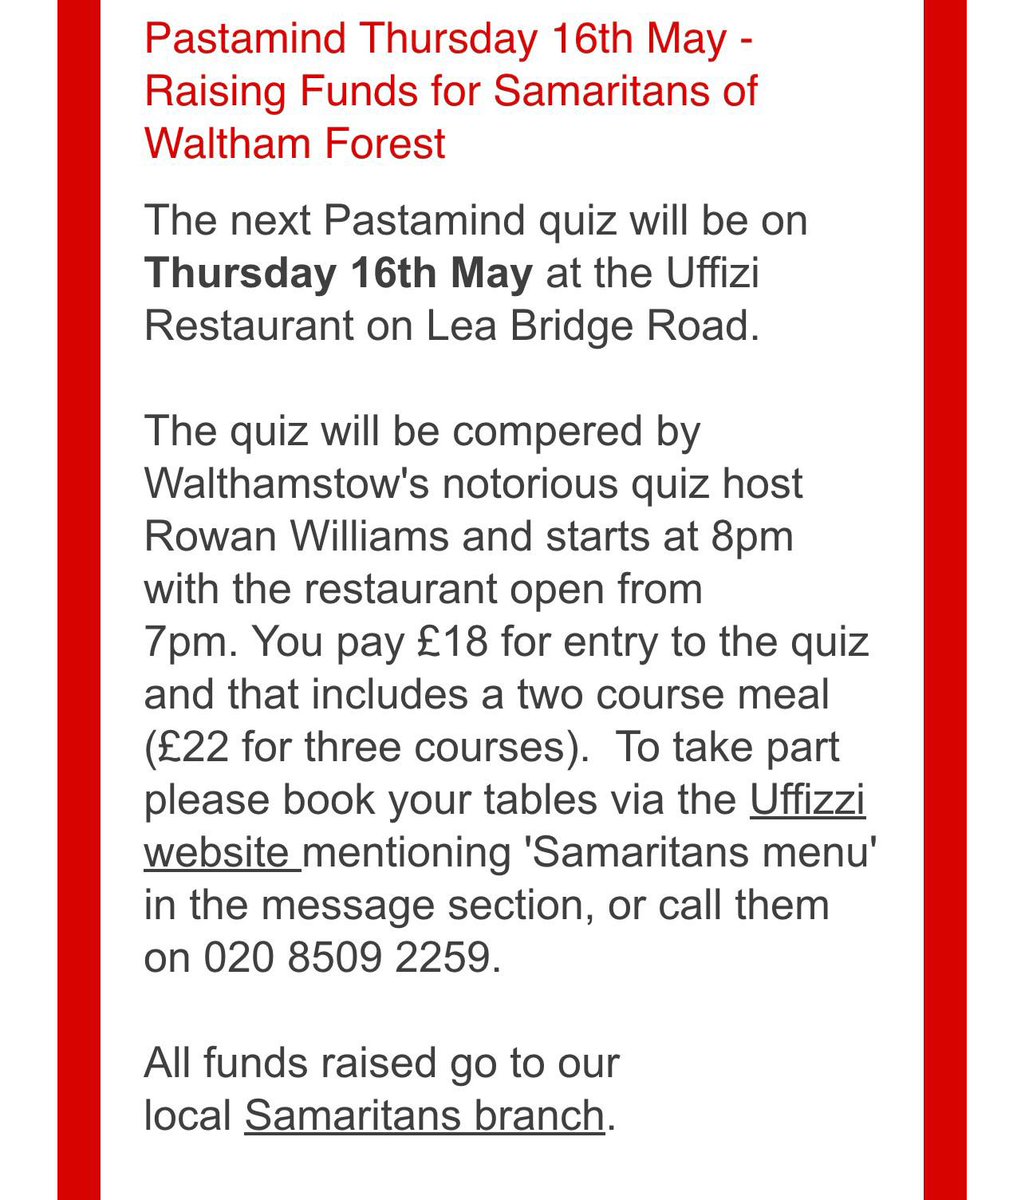 To clarify Walthamstow it’s not the notorious former Archbishop of Canterbury Rowan William’s running the pastamind quiz for @samaritans next week but the other Walthamstow Rowan @rowanmc a brilliant quiz host (but not ordained..) apologises for confusion from my newsletter! 🥹😂